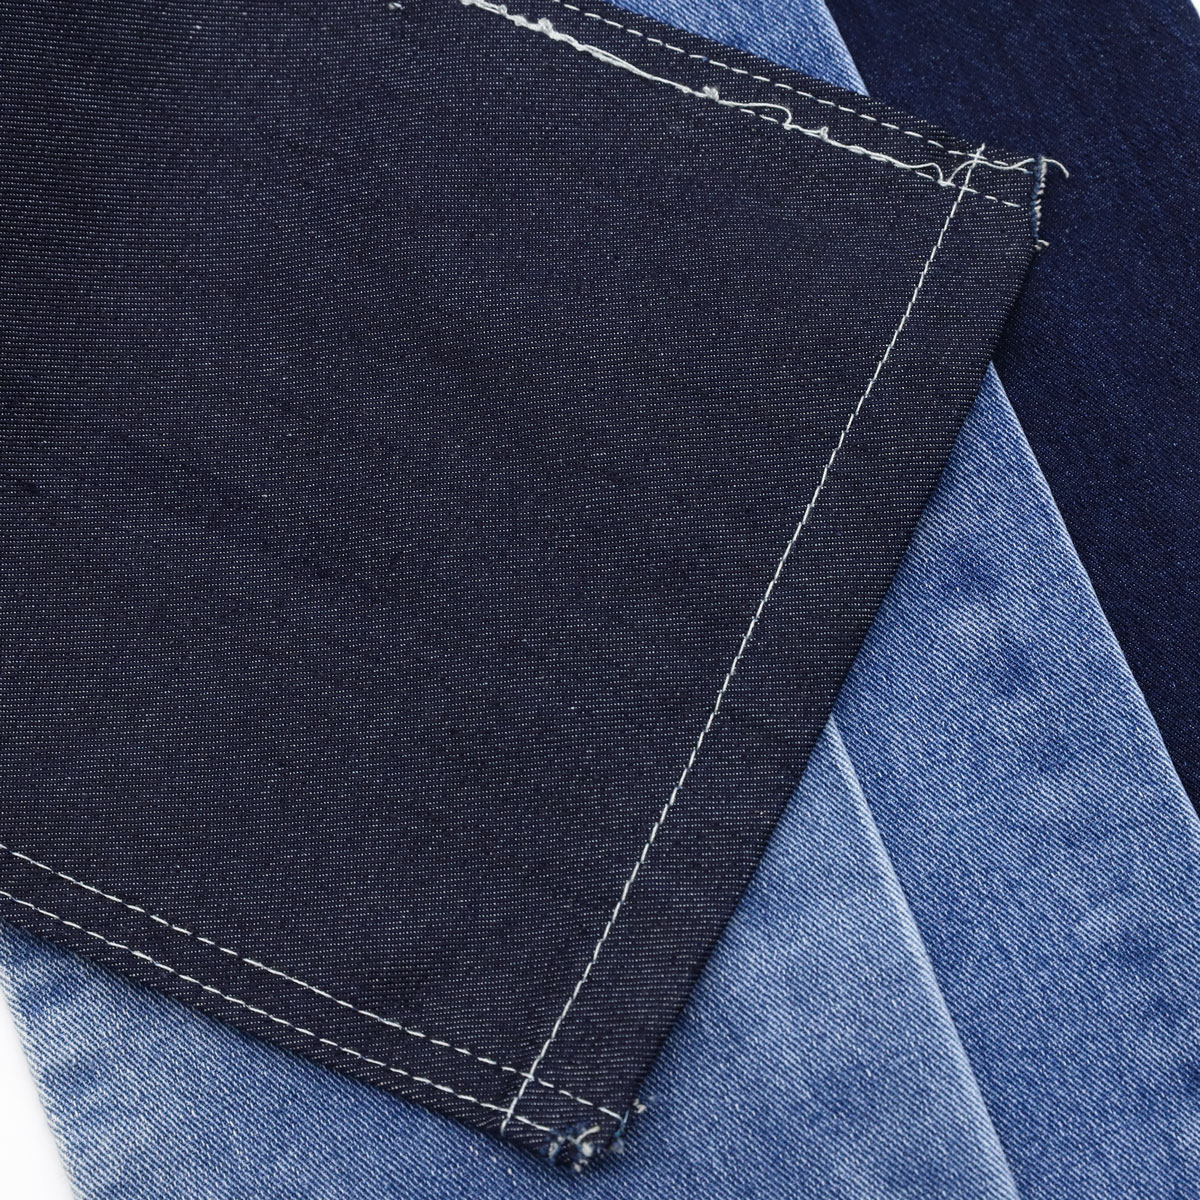 Good Non-stretch Denim Fabric: Tips for Buying Good Non-stretch Denim Fabric 2